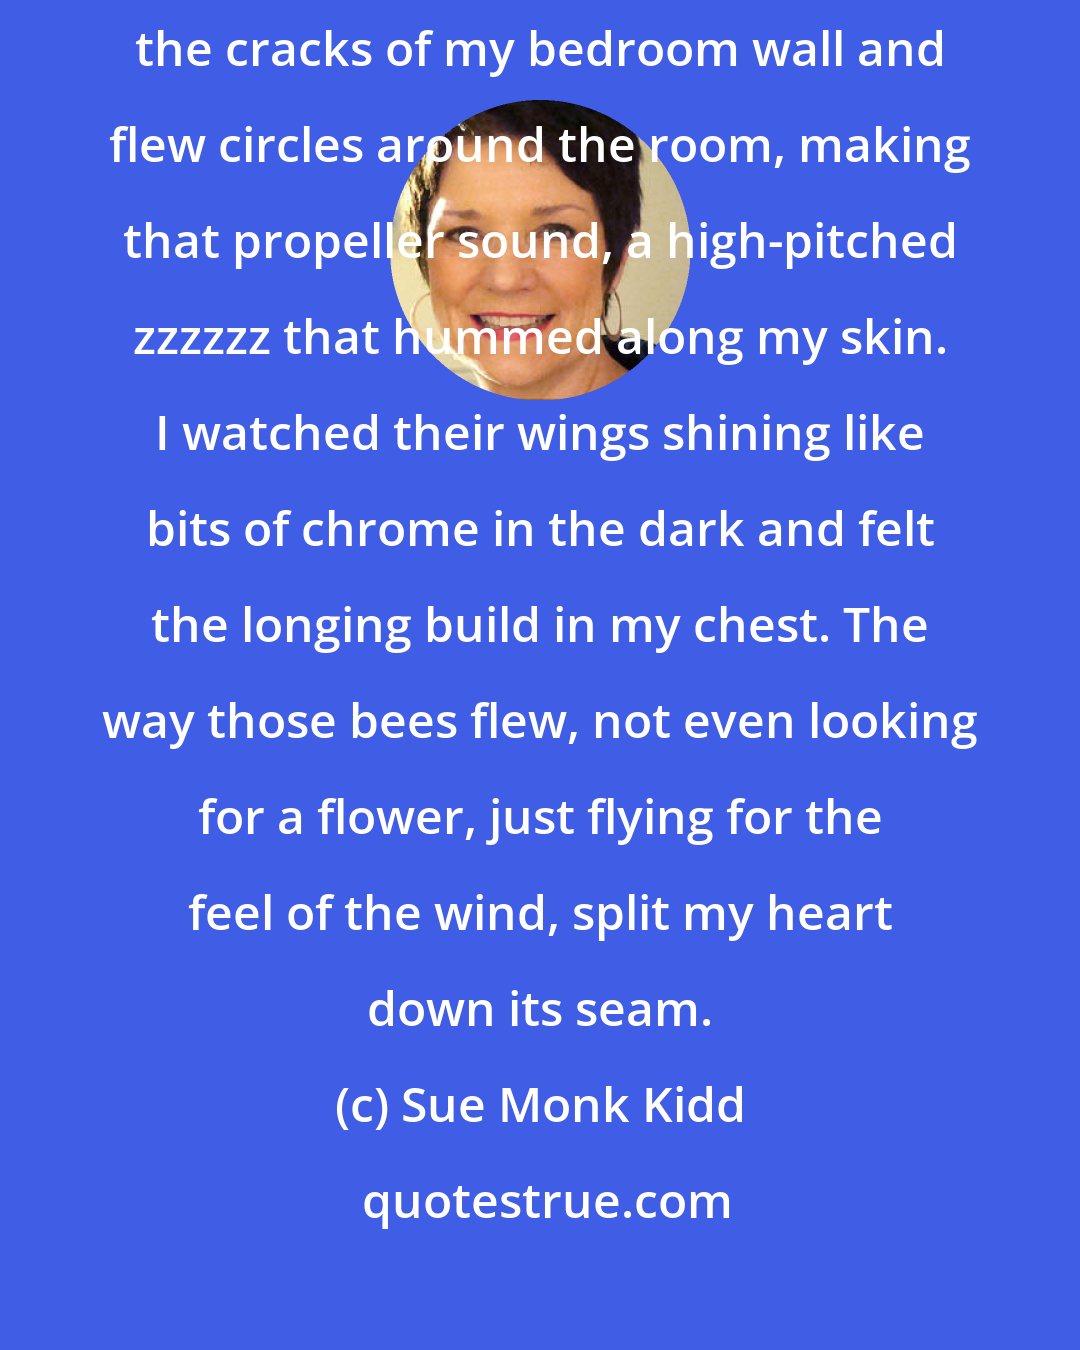 Sue Monk Kidd: At night I would lie in bed and watch the show, how bees squeezed through the cracks of my bedroom wall and flew circles around the room, making that propeller sound, a high-pitched zzzzzz that hummed along my skin. I watched their wings shining like bits of chrome in the dark and felt the longing build in my chest. The way those bees flew, not even looking for a flower, just flying for the feel of the wind, split my heart down its seam.